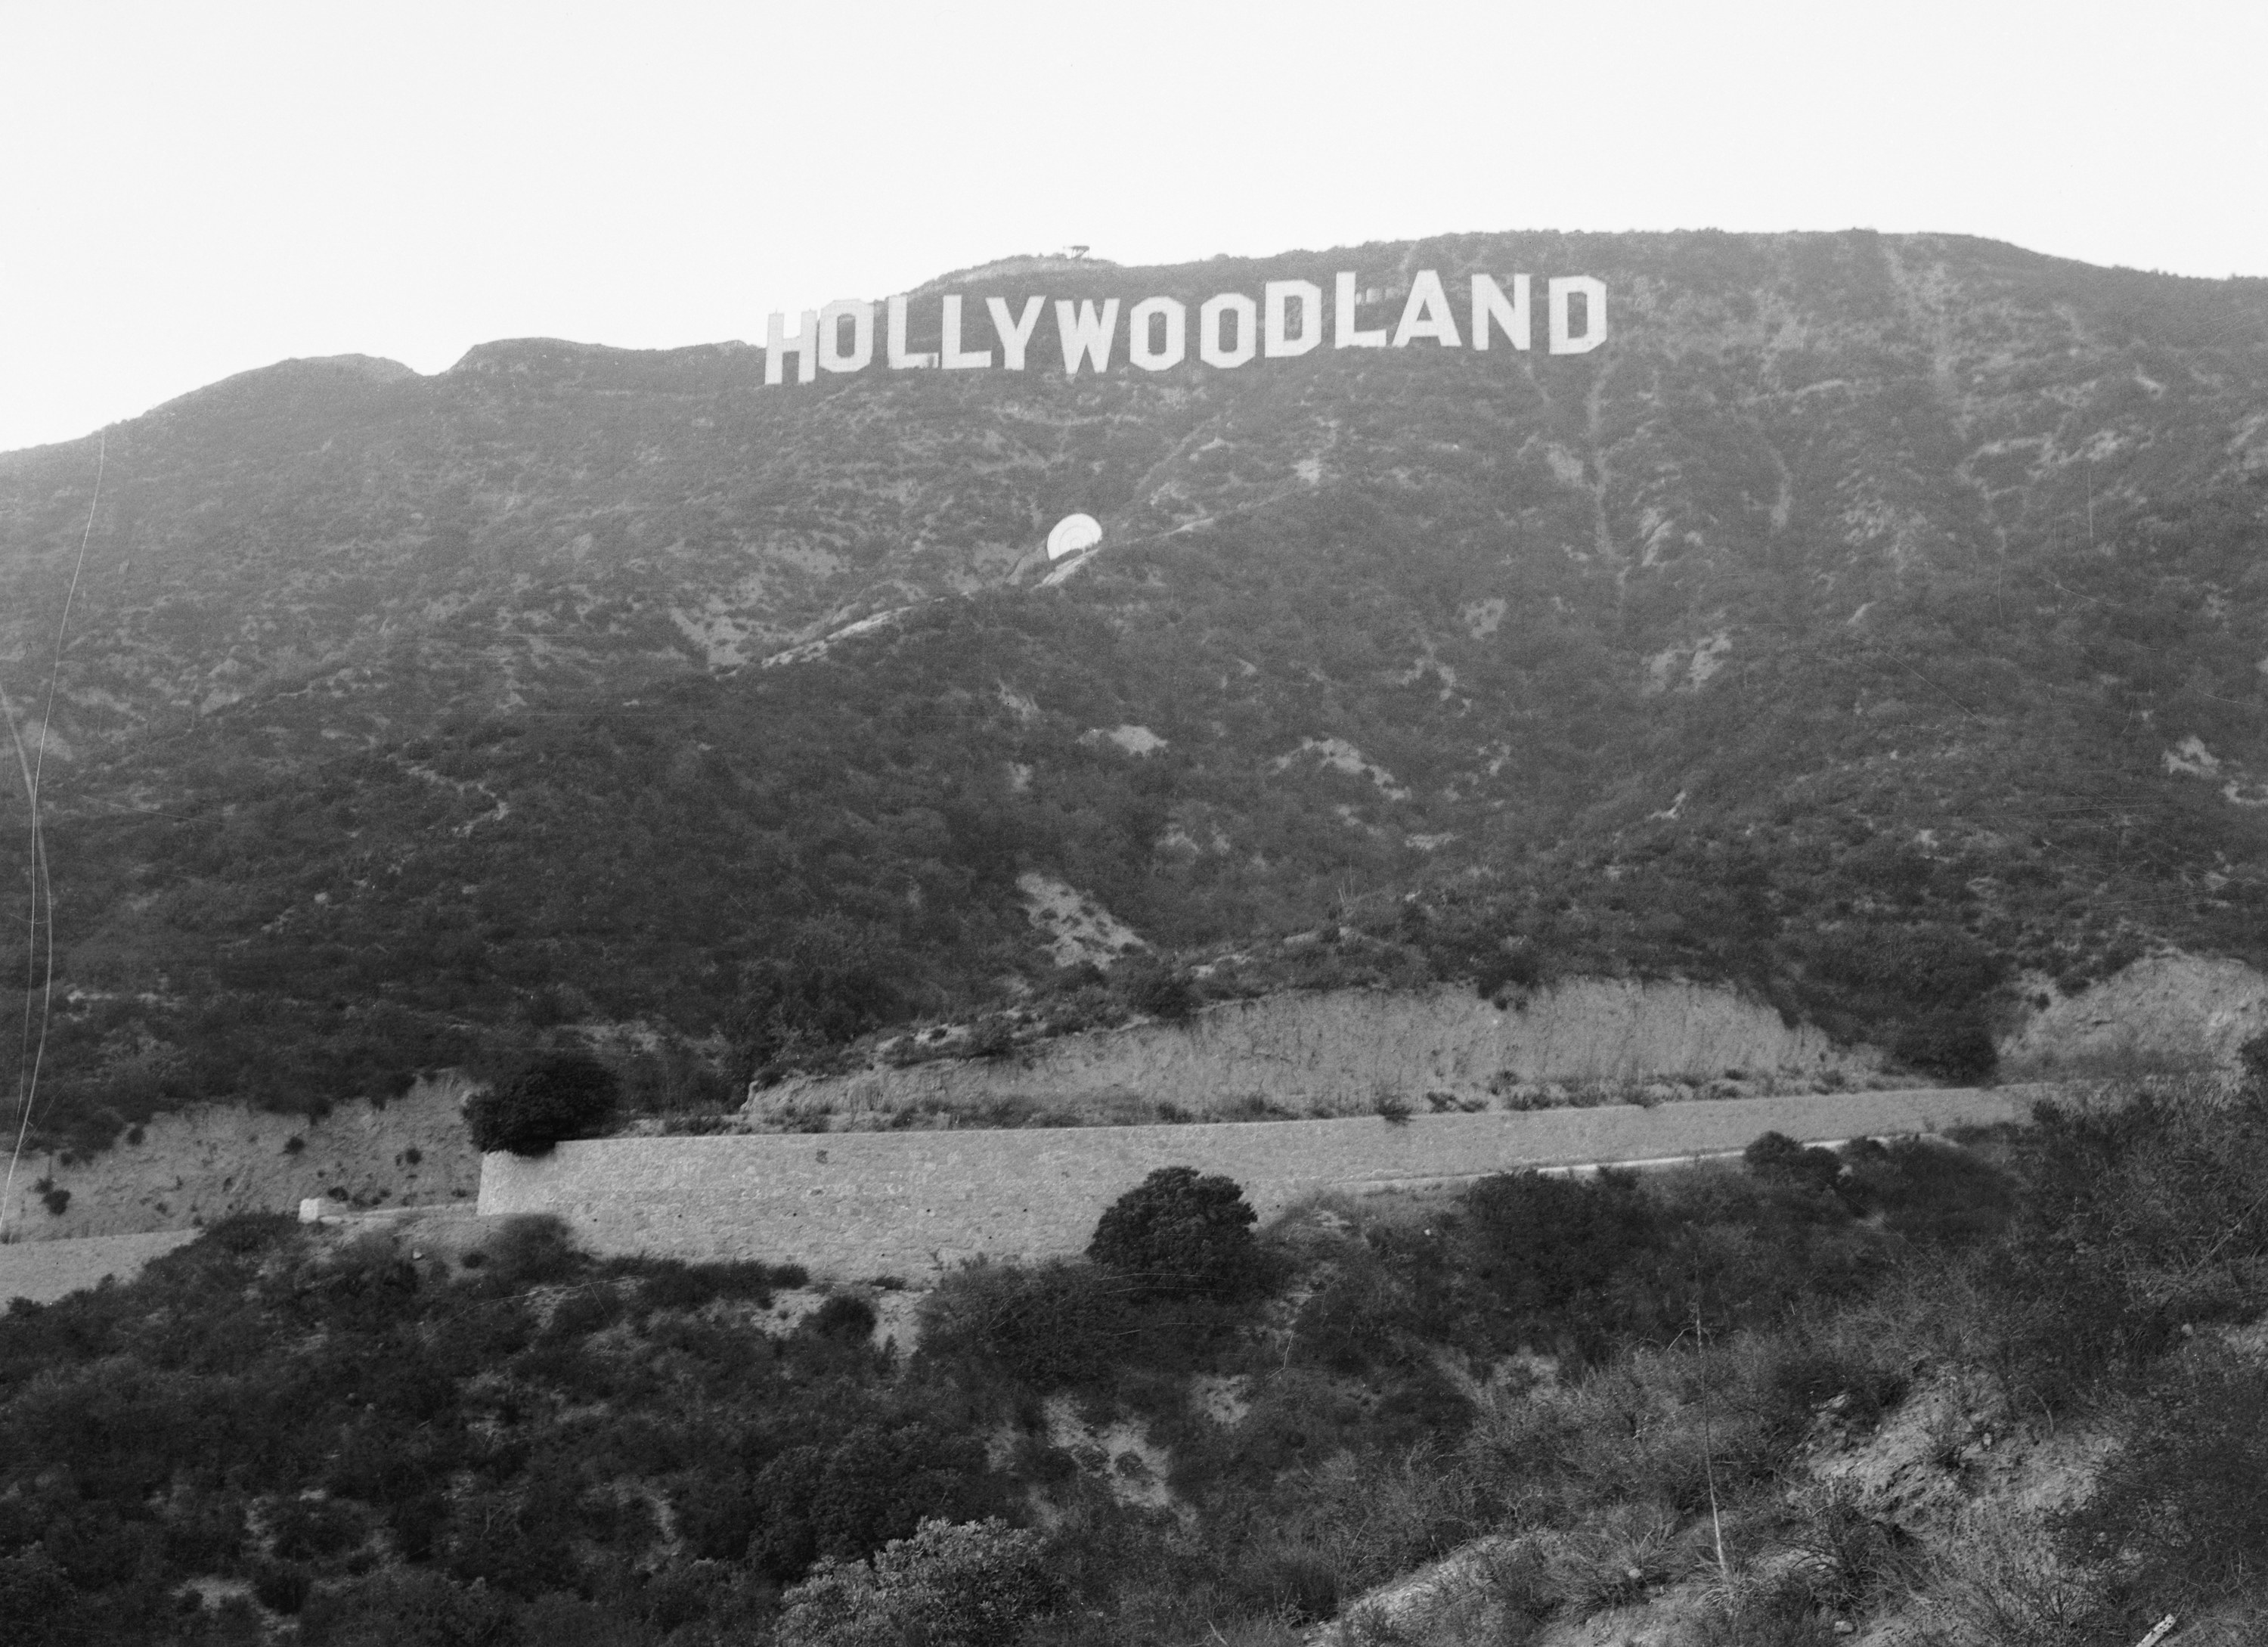 Actress Ends Life With Hump From Hollywood Sign. Pictured above is the giant sign overlooking Hollywood, California